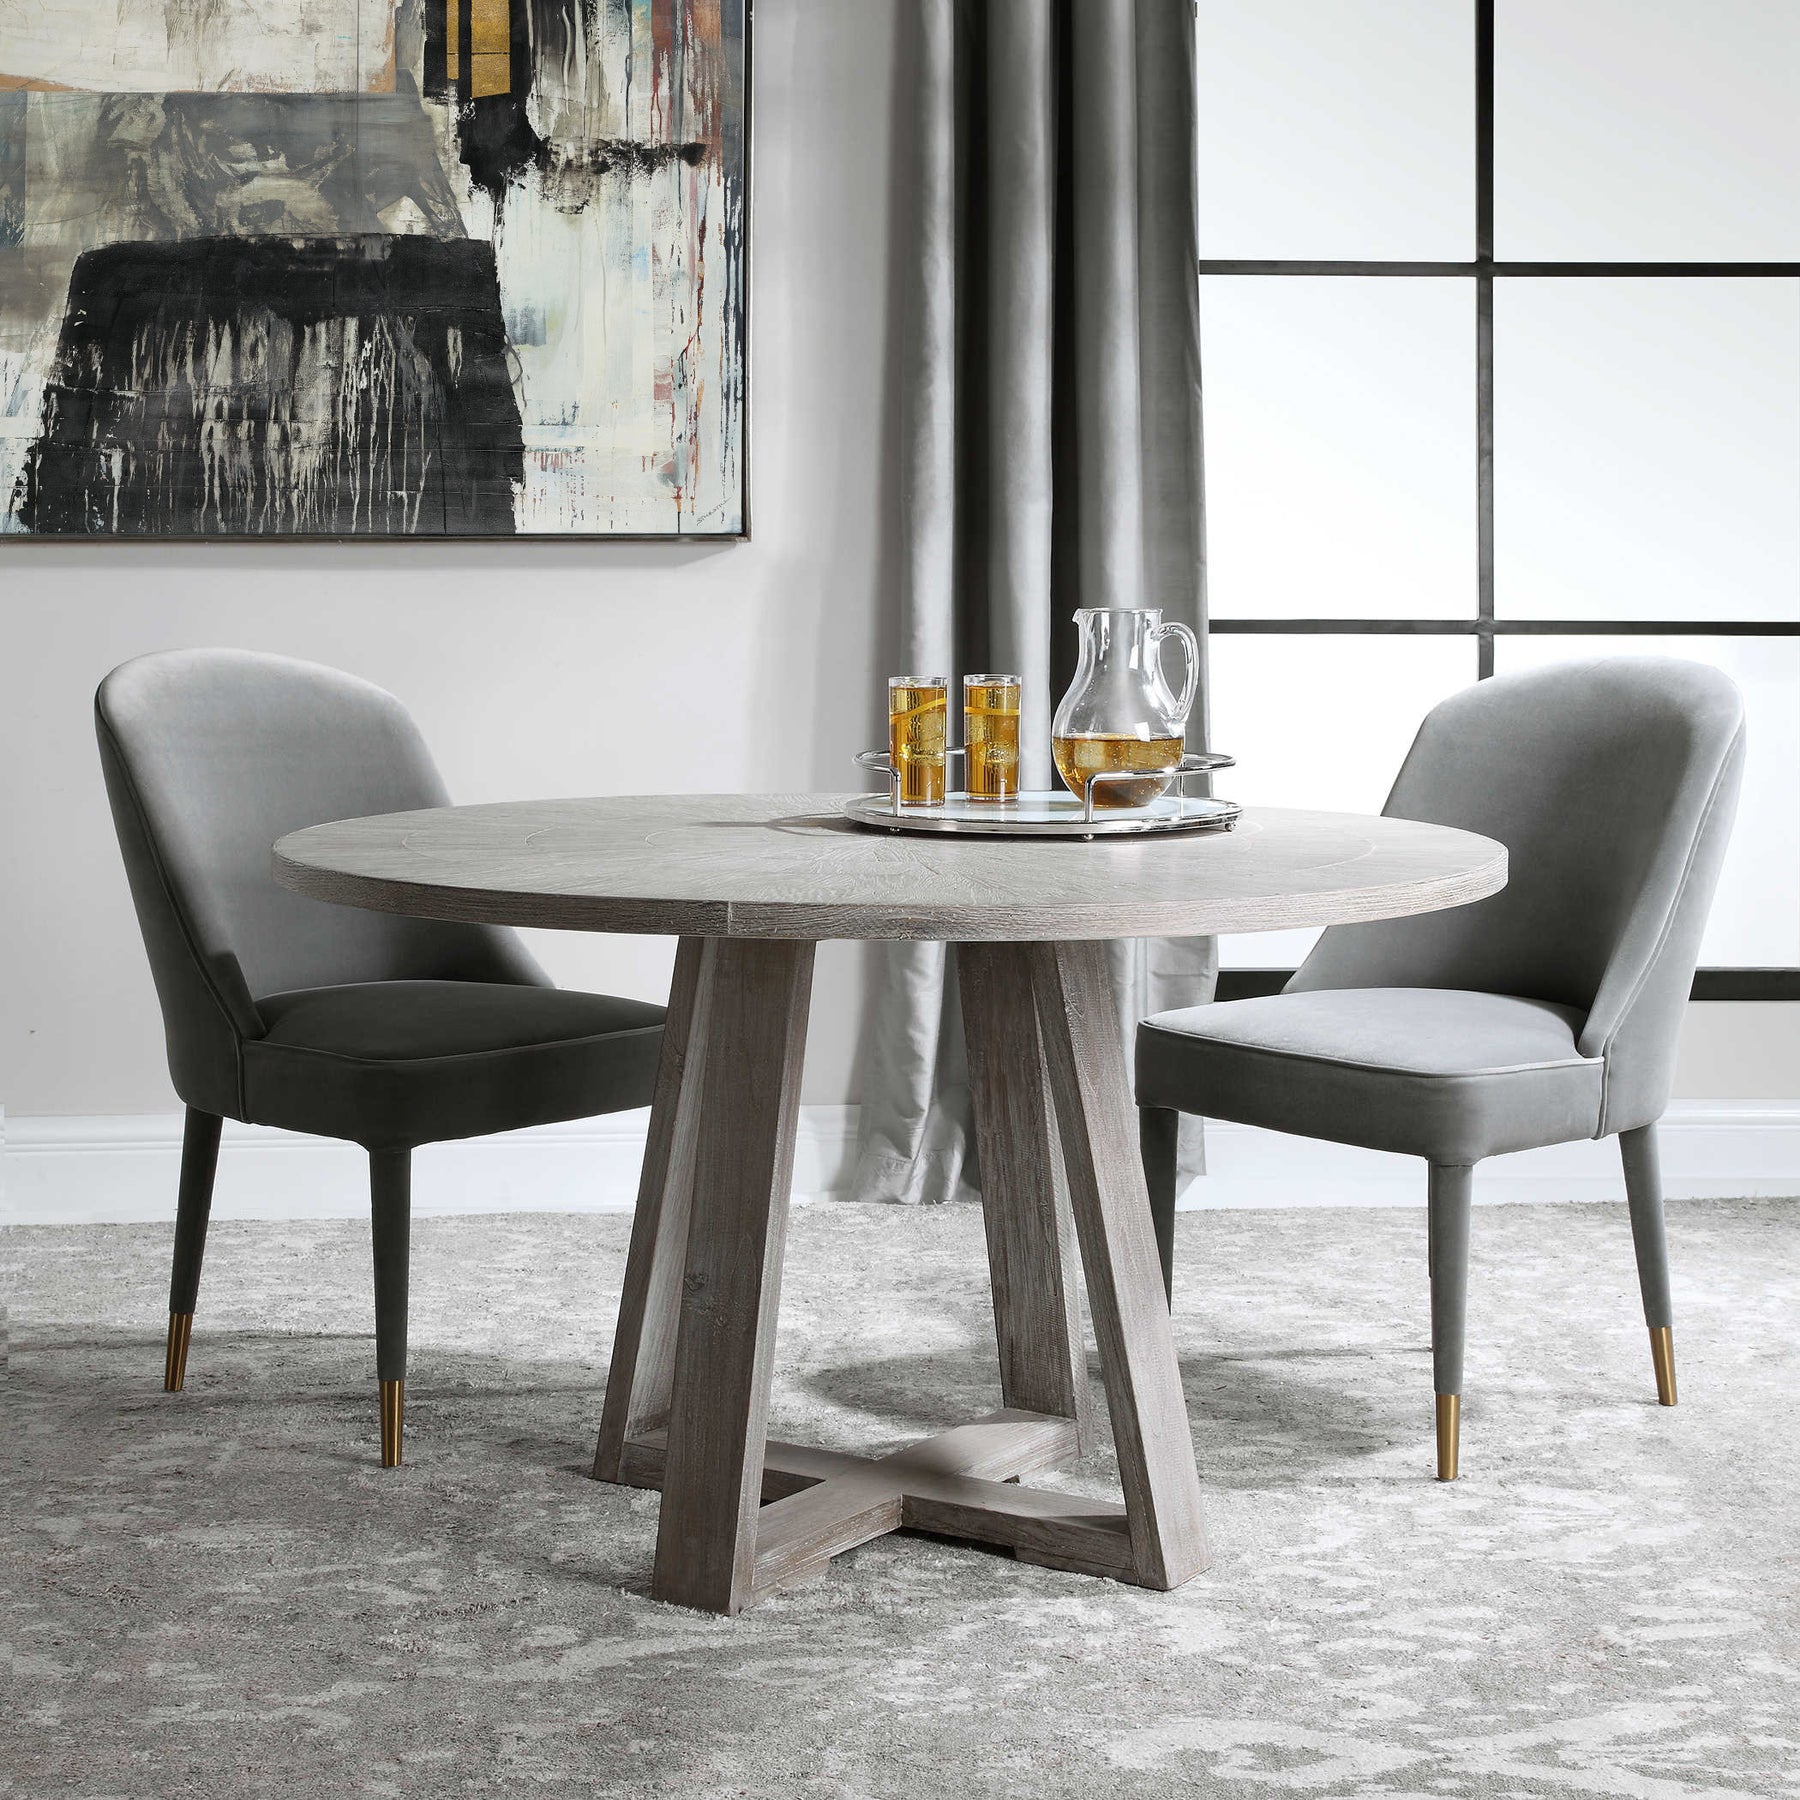 Viva Reclaimed Mixed Wood Round Dining Table 120cm